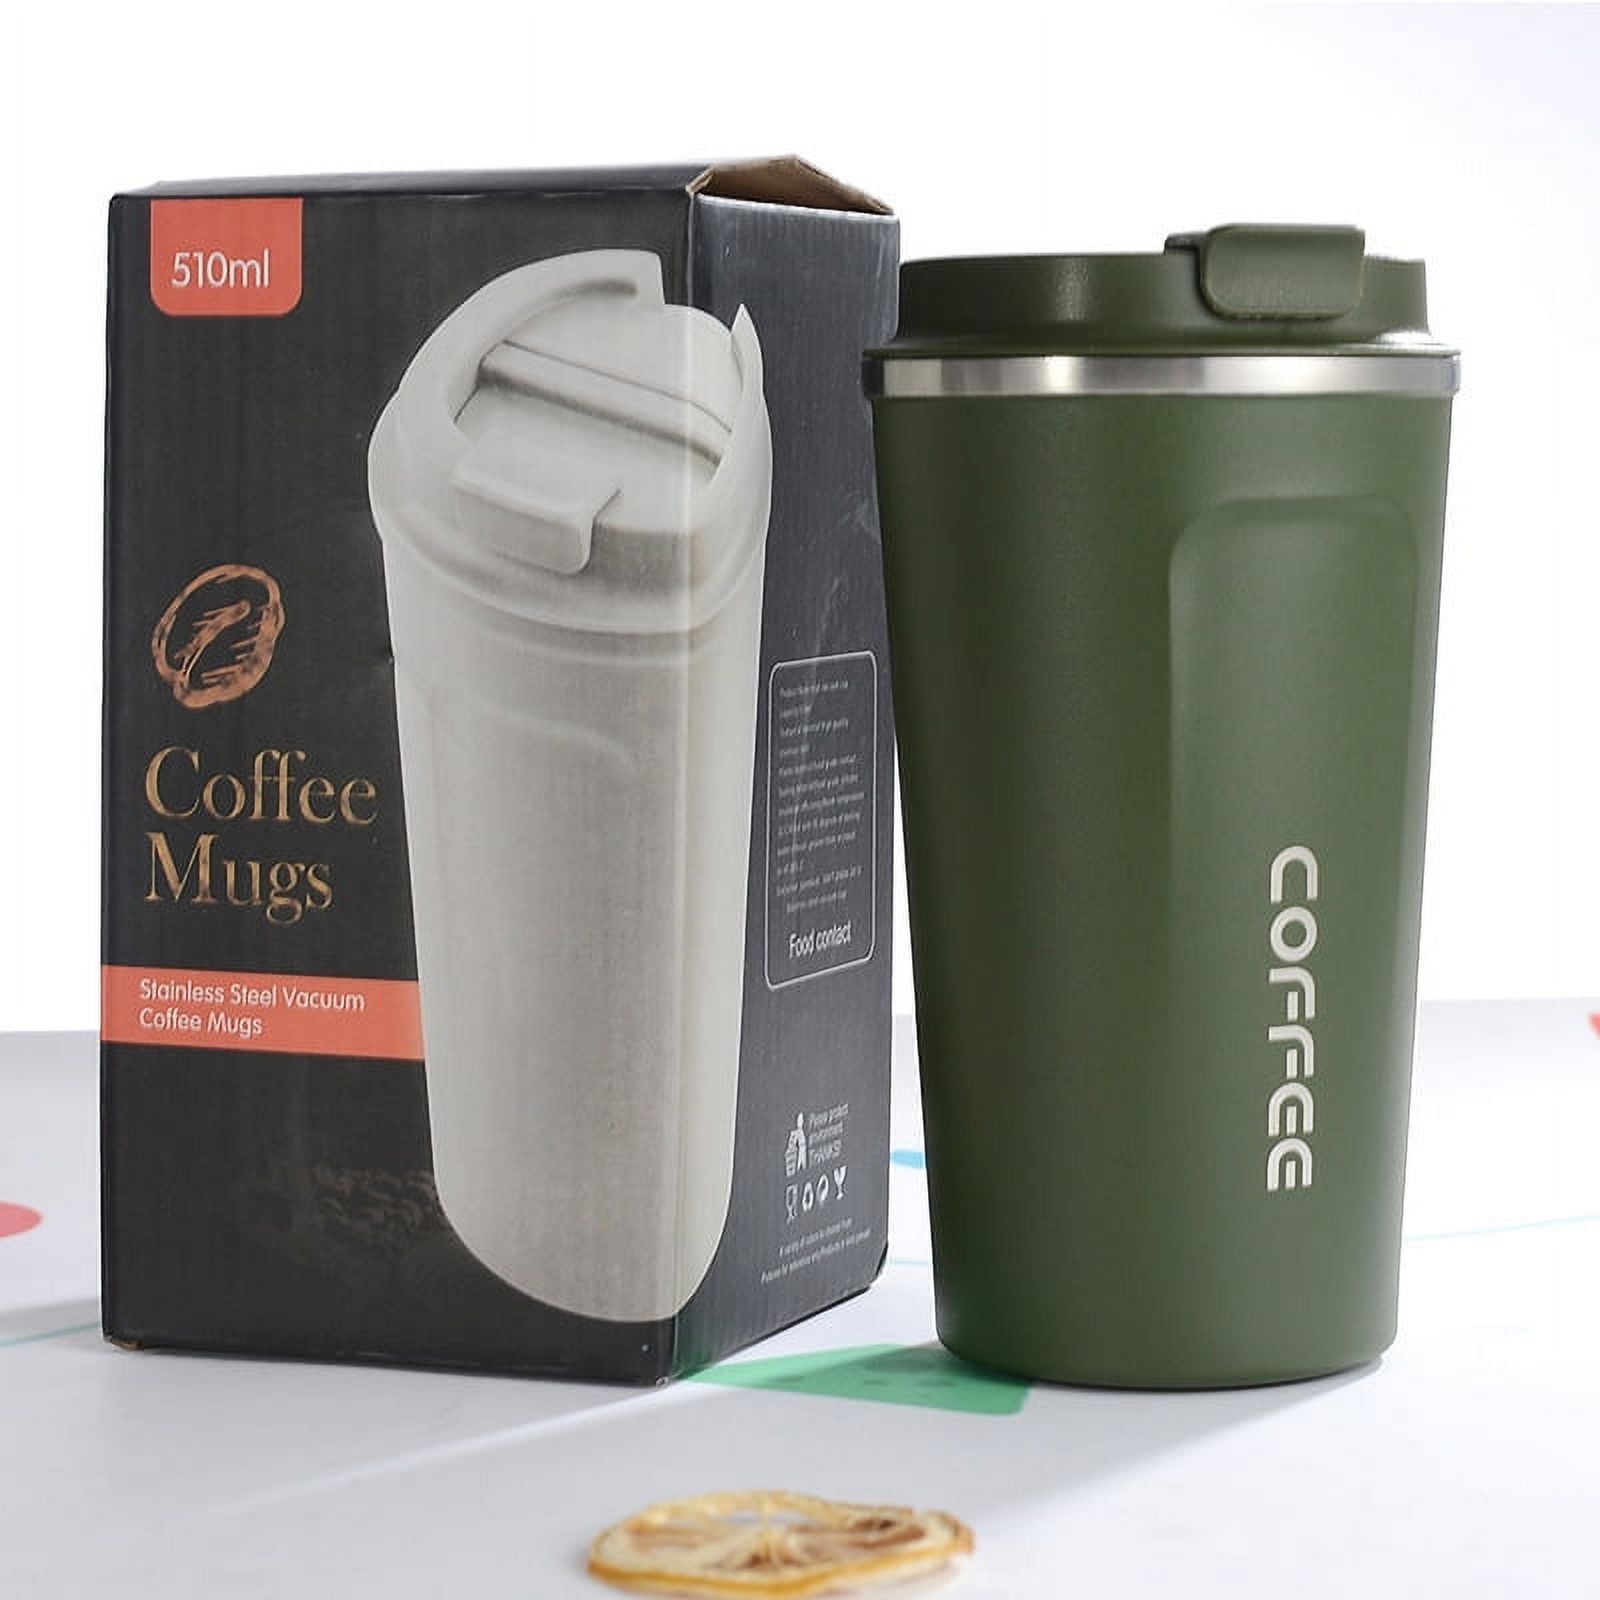 Insulated Coffee Mug Stainless Steel Vaccum Travel Mug 380ml/510ml  Leakproof Portable Coffee Cup with Lid